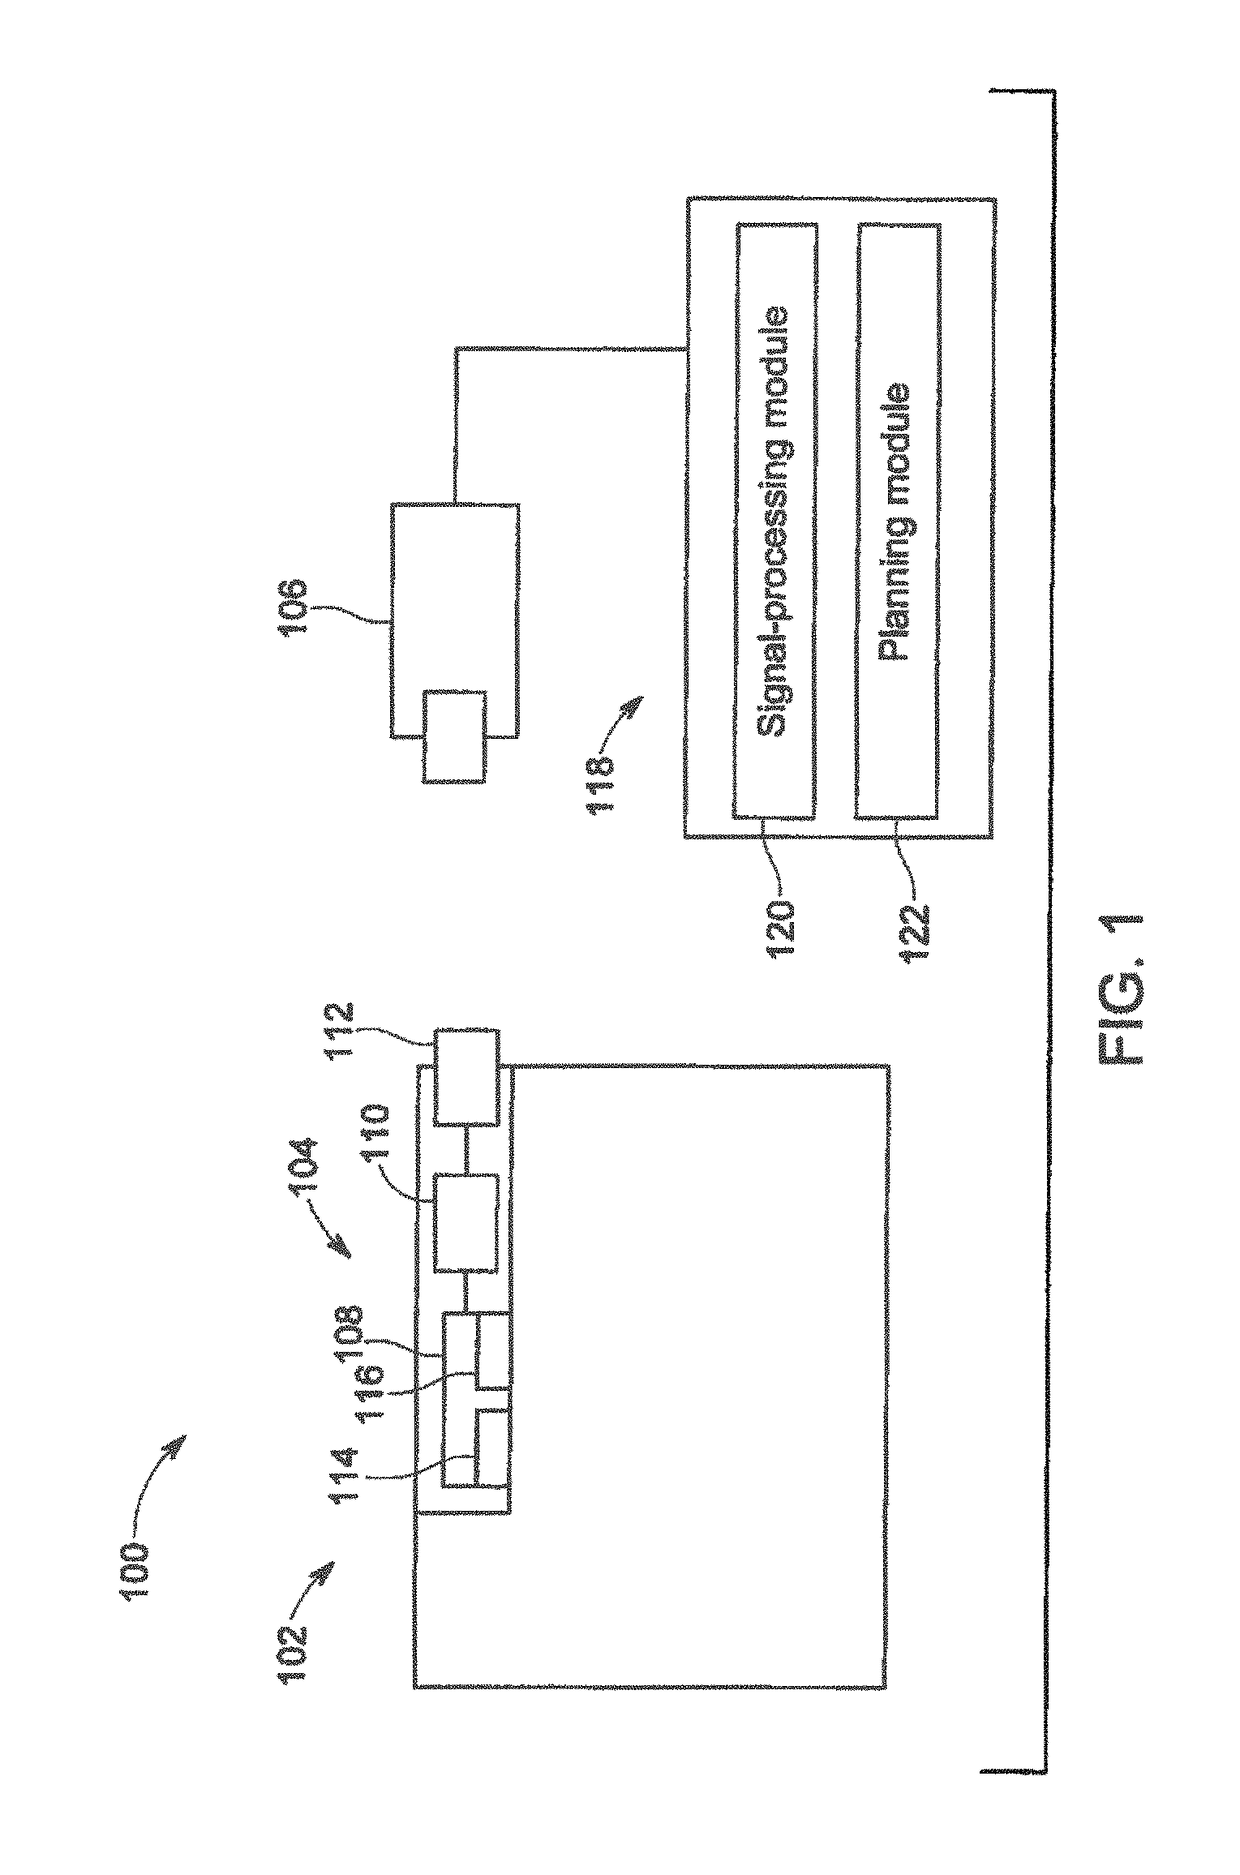 Sensing system and method for analyzing a fluid at an industrial site